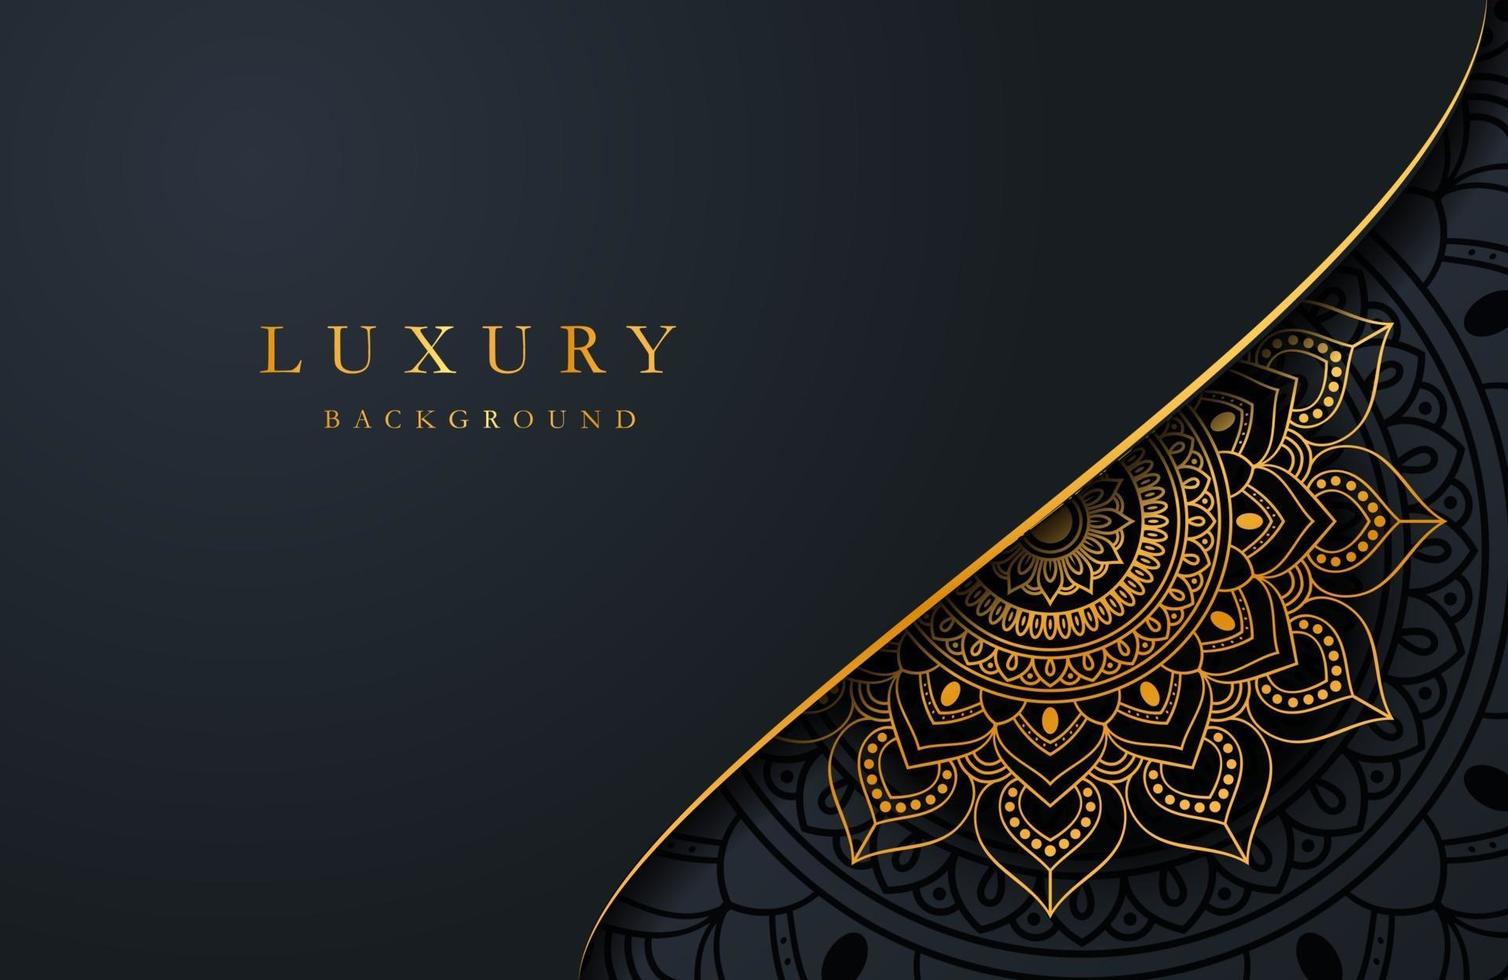 Luxury background with gold islamic arabesque ornament on dark surface vector